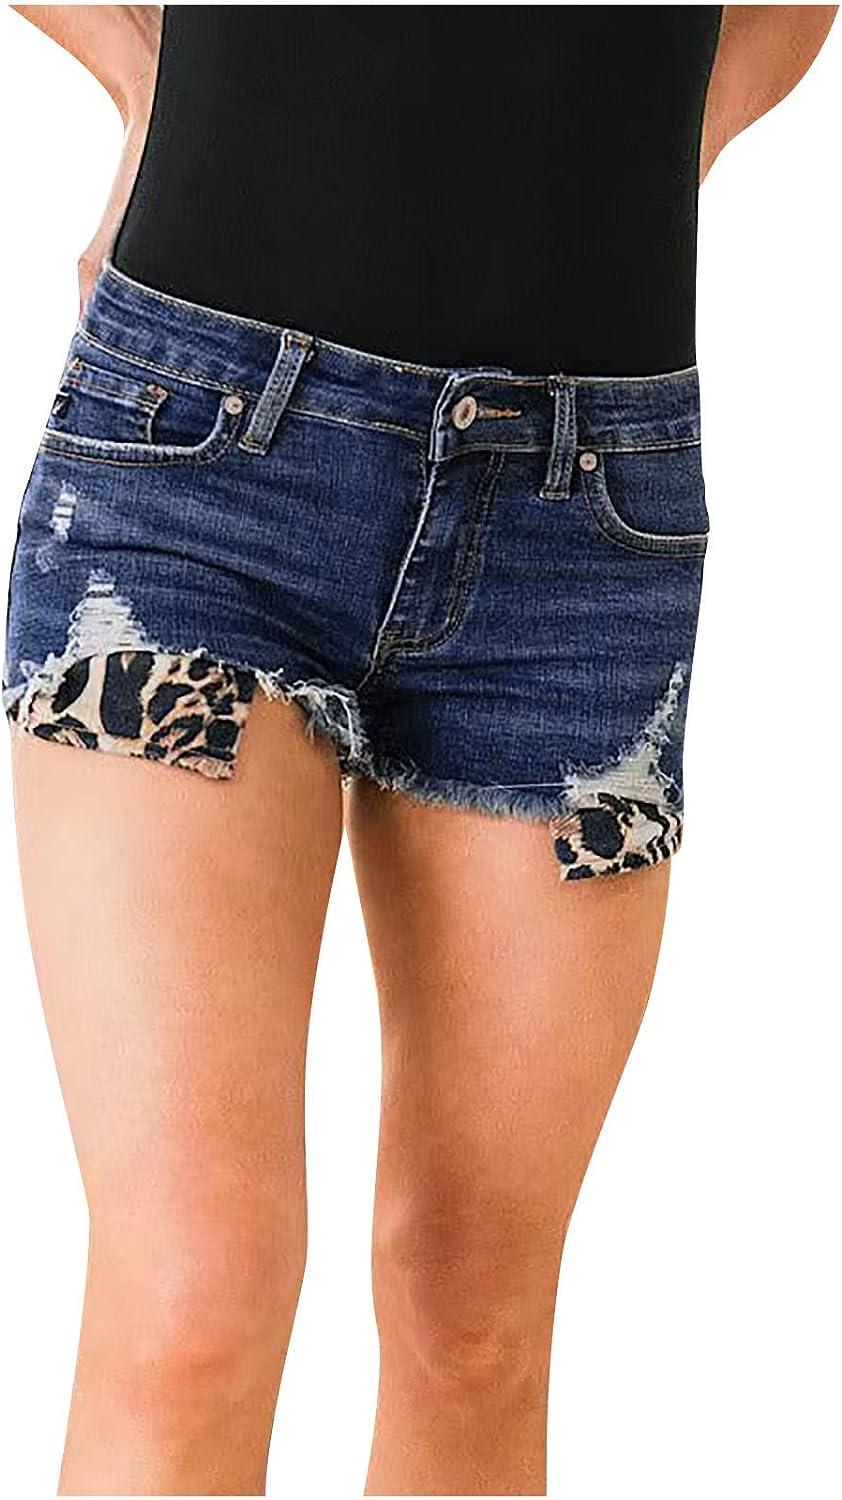 Women Summer Casual Hot Pants Denim Beach Stretchy Ripped Jeans Shorts